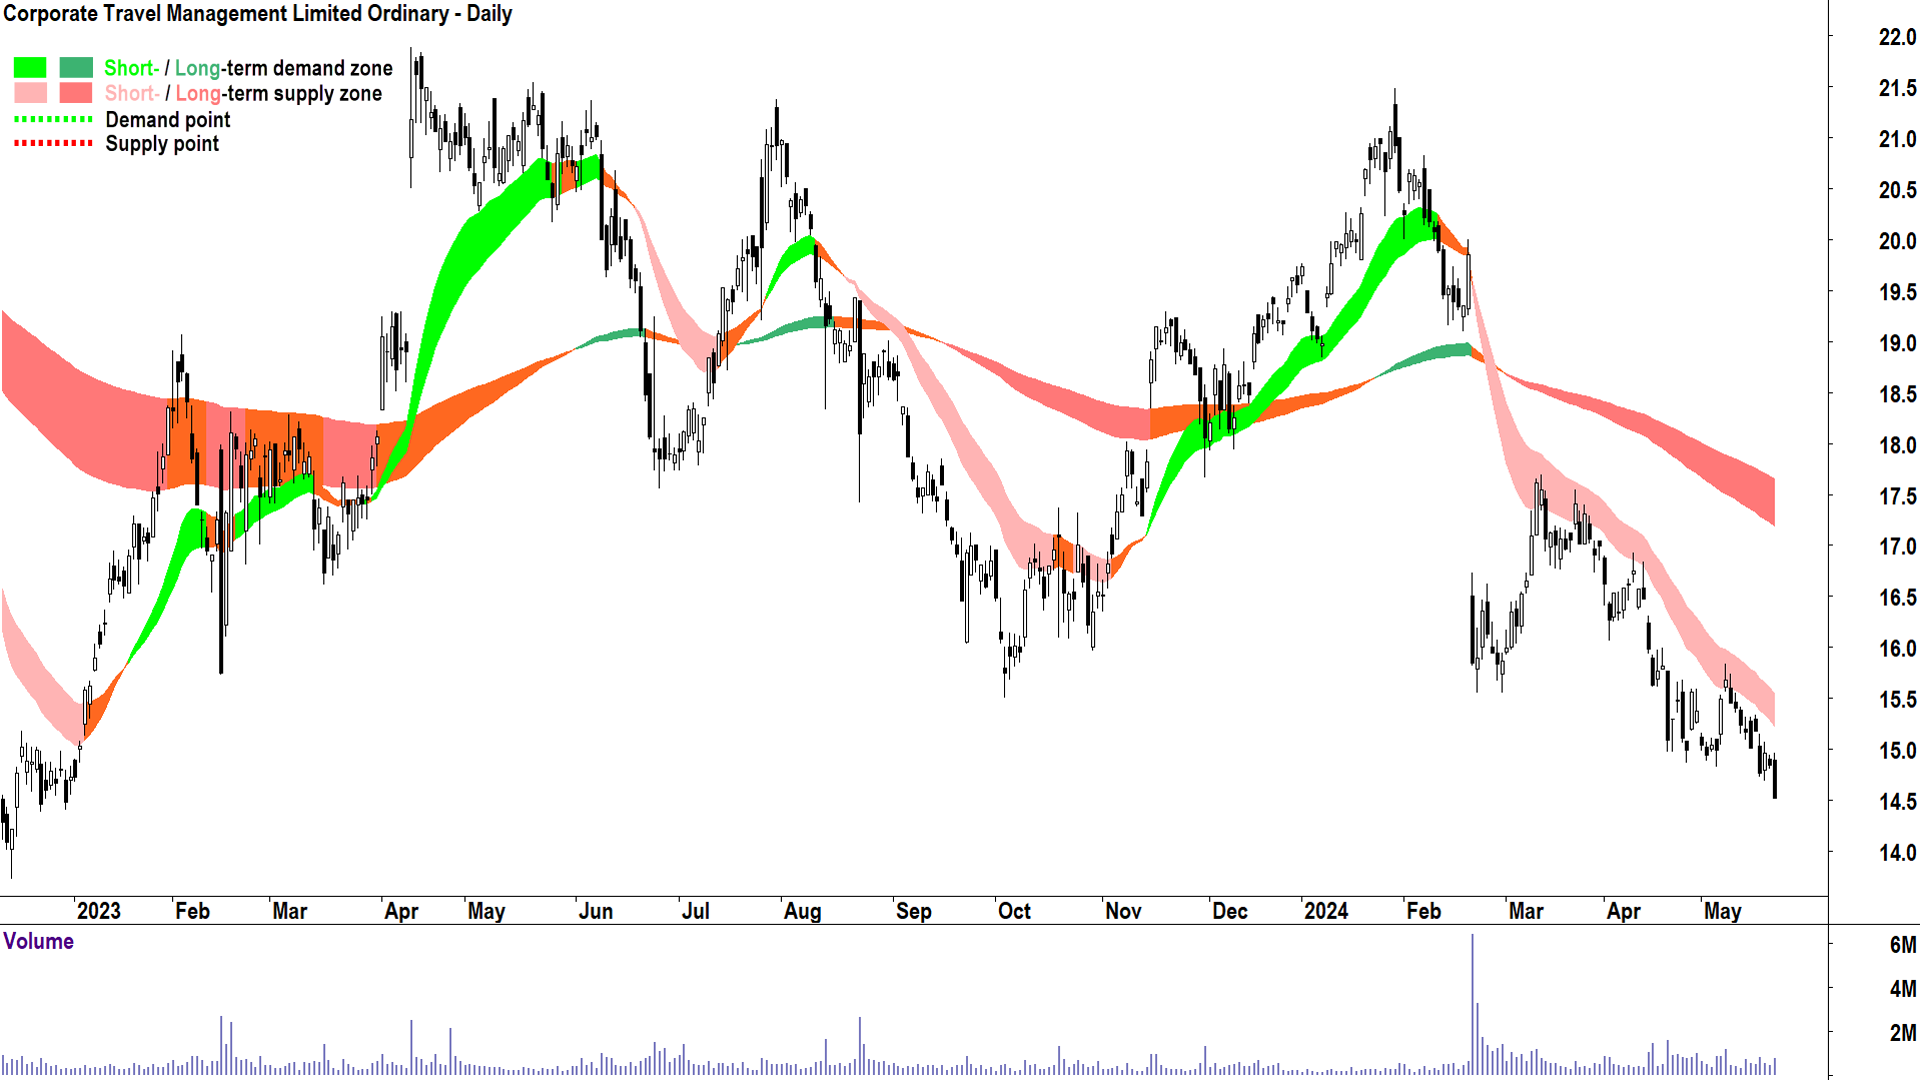 Corporate Travel Management (ASX-CTD) chart 23 May 2024